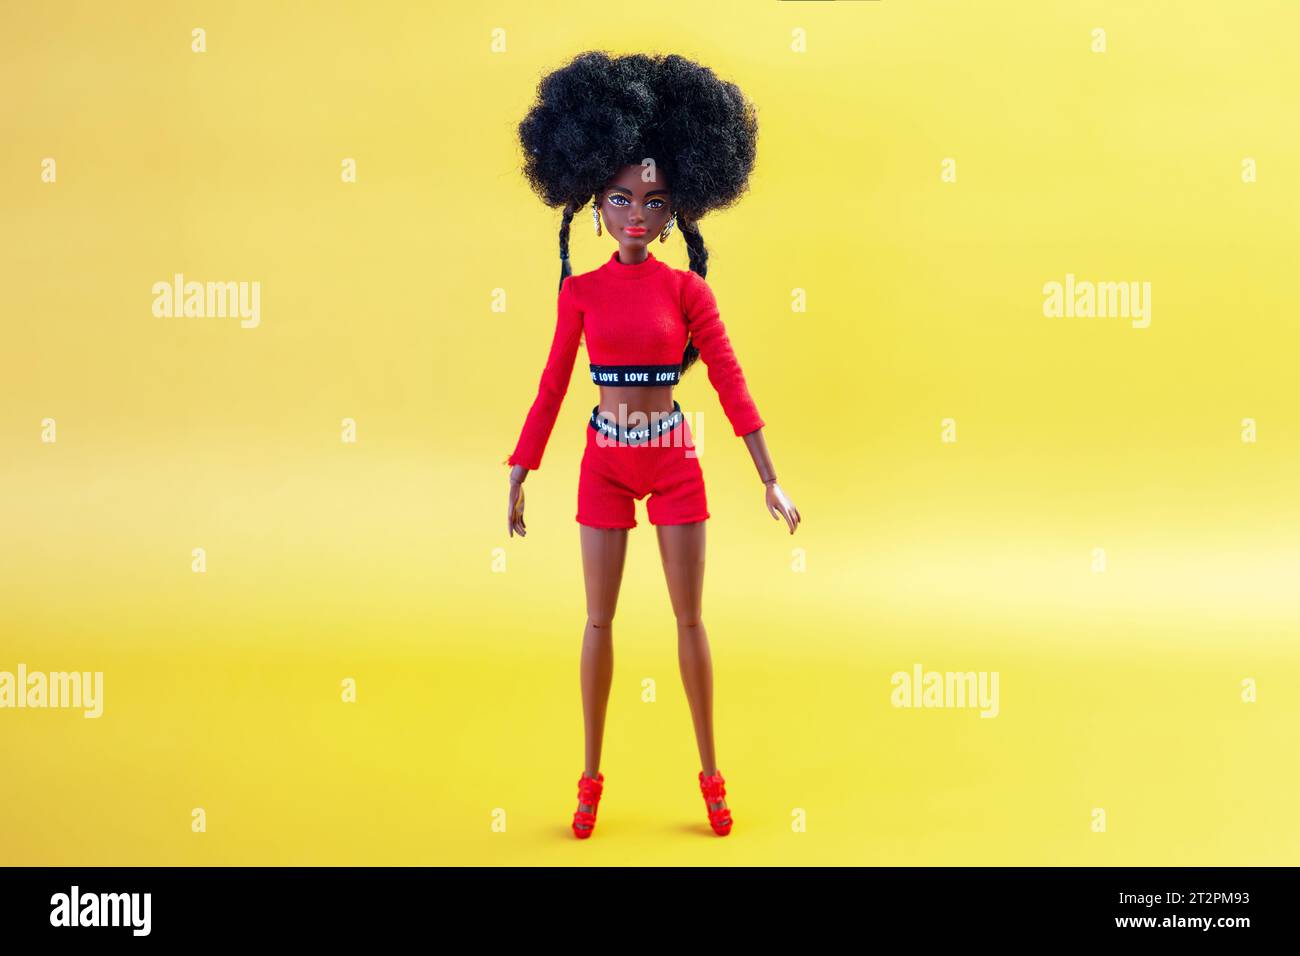 October 9, 2023. Barnaul, Russia: african american Barbie doll with black hair in a red suit standing on a yellow background. Stock Photo